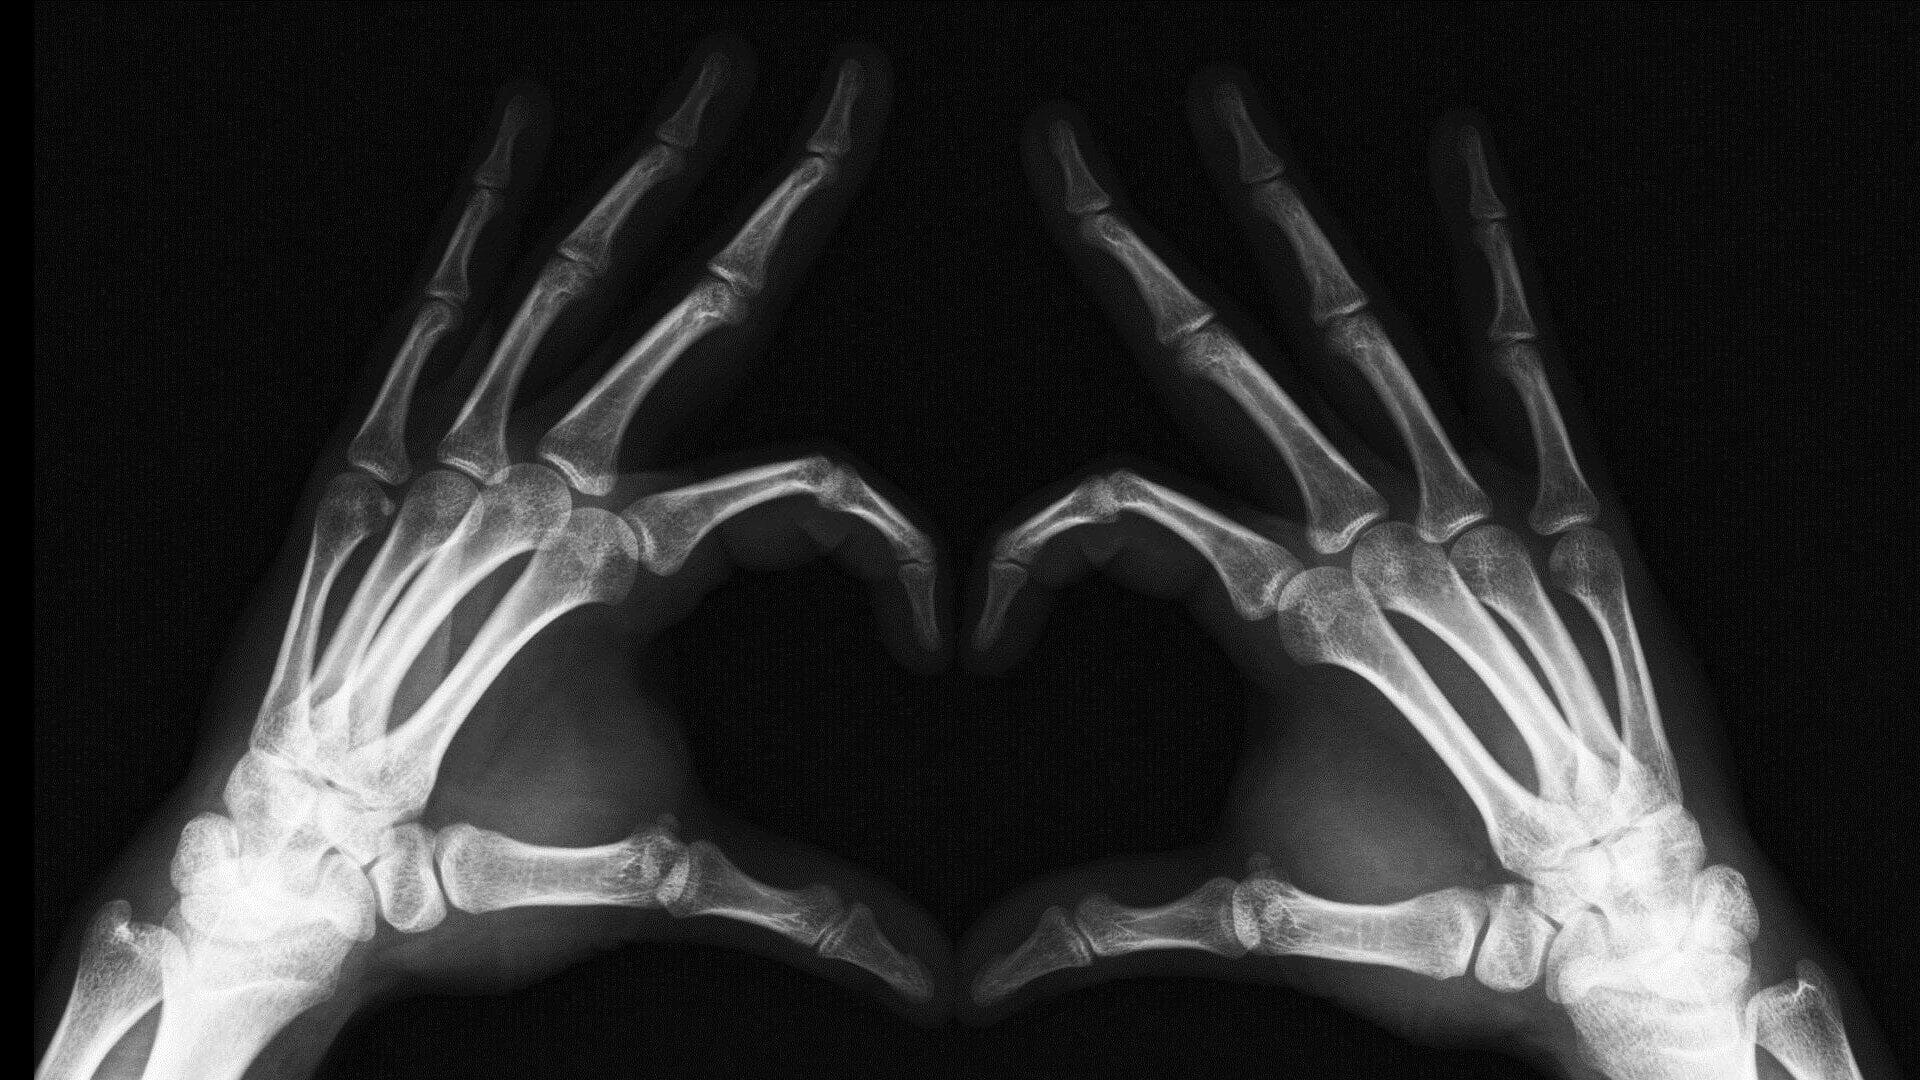 Image: X-ray of hands making a heart shape  out of the skeleton